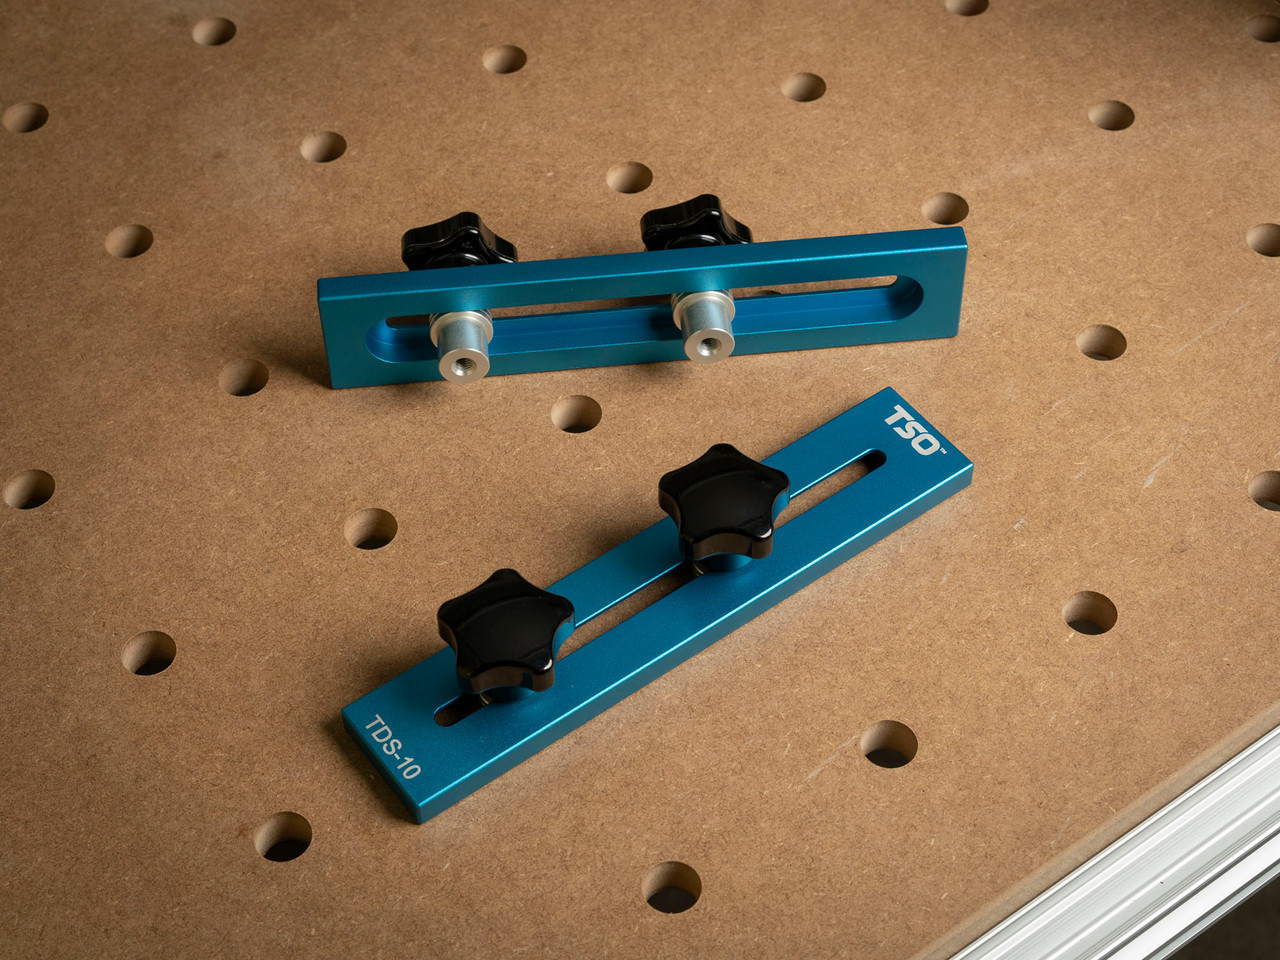 Once secured, TDS-10 DogStops can be removed from the worktop while retaining their exact positioning for further use.